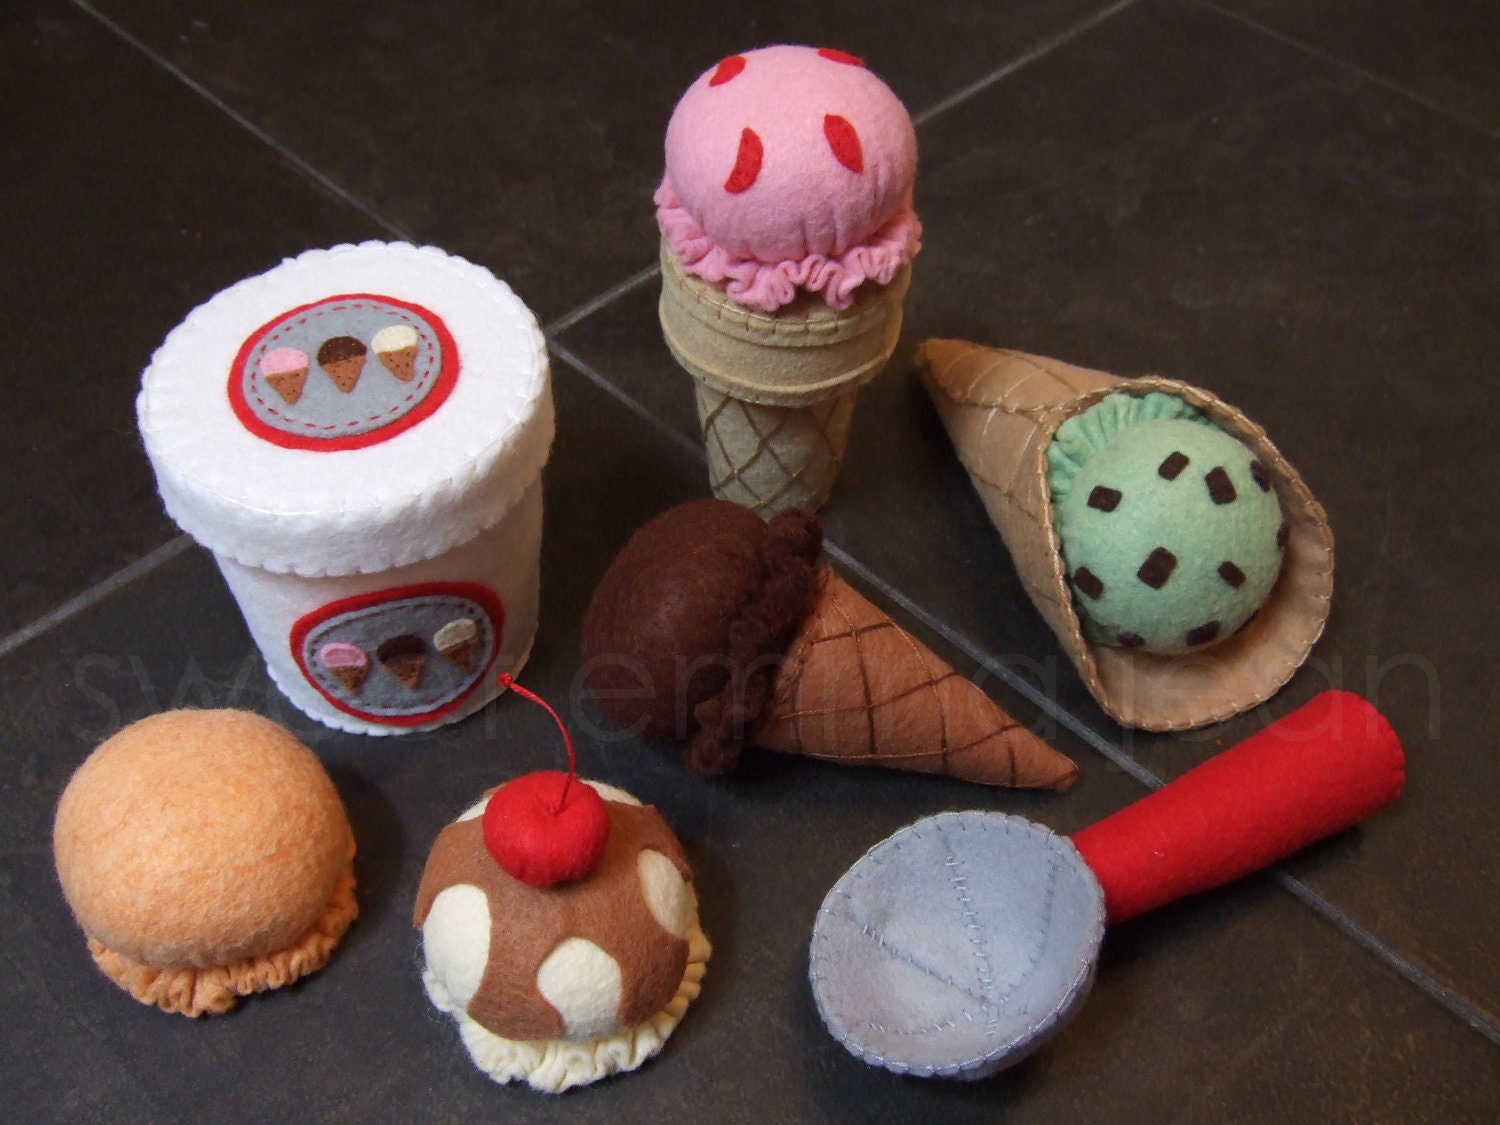 Ice Cream Cone Pretend Game Balancing Learning Play Food